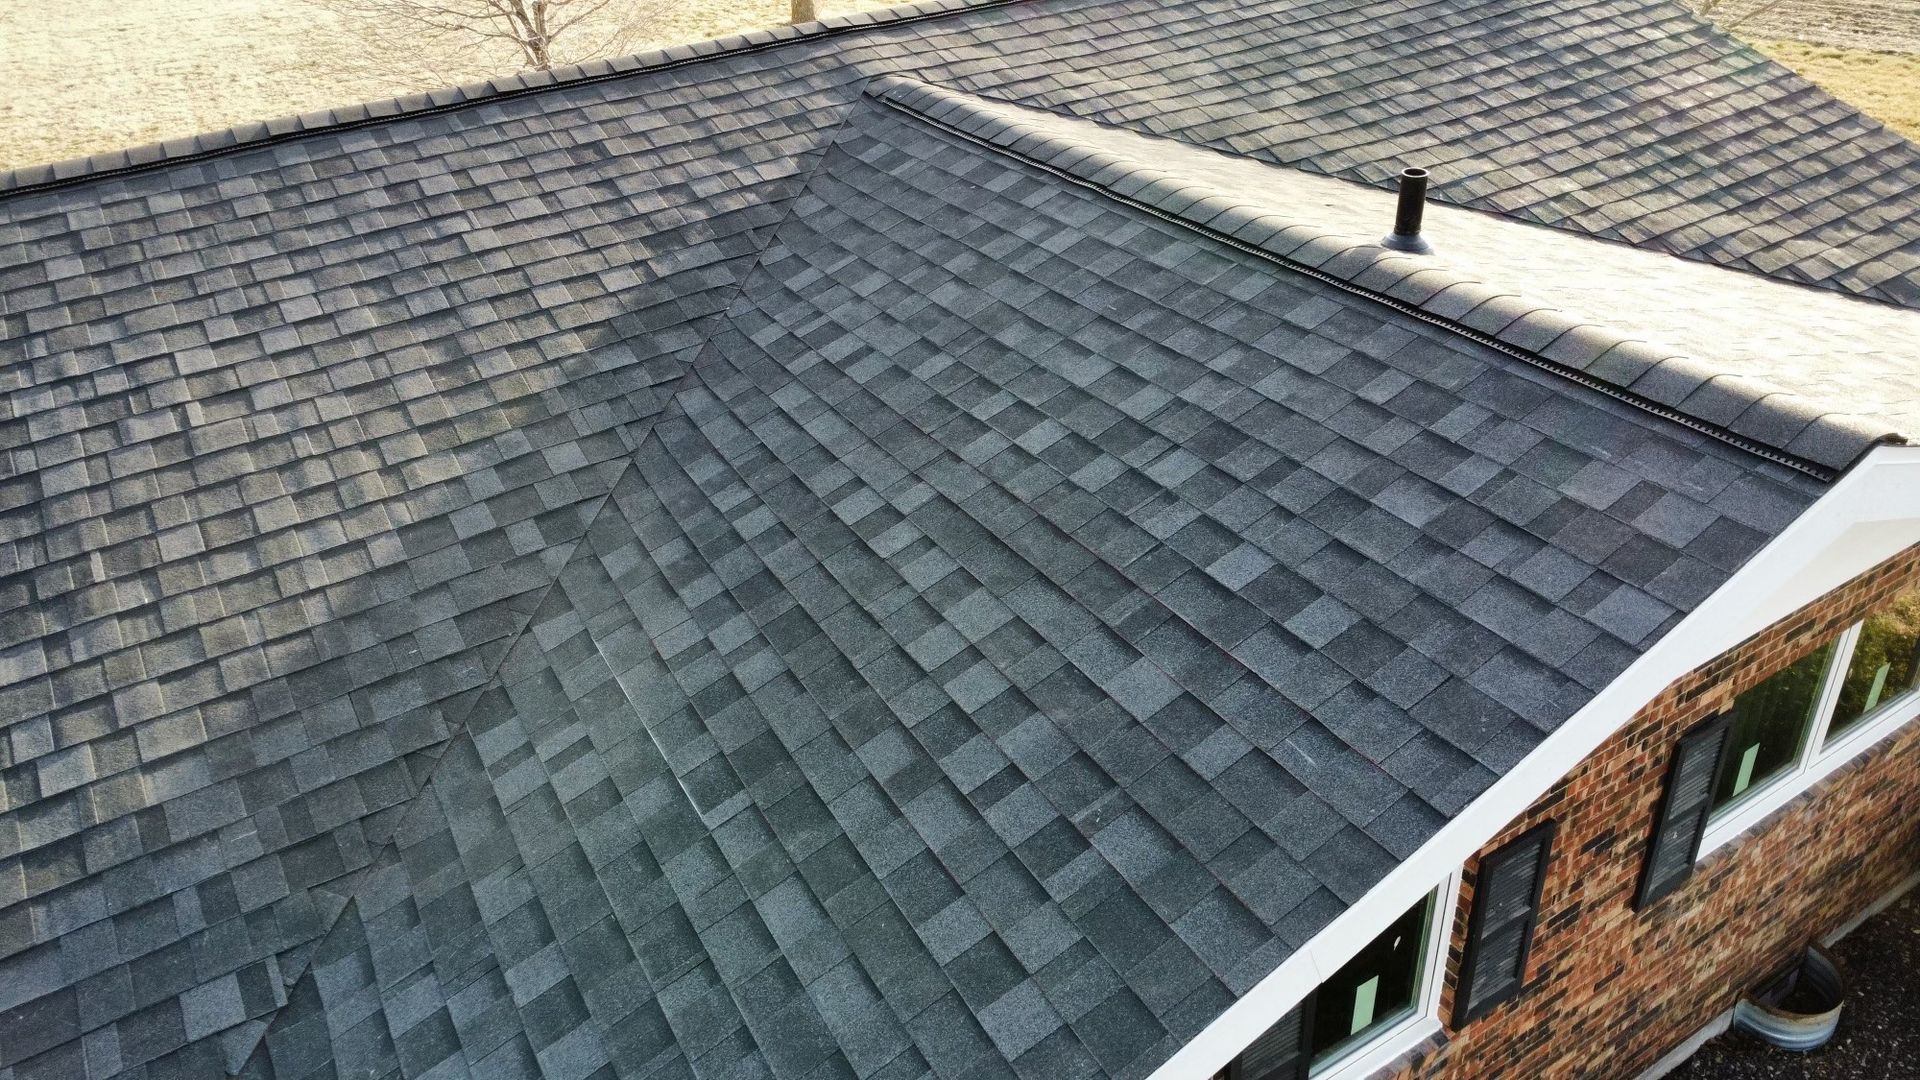 Aerial view of a roof on a brick house with a dark shingle roof.